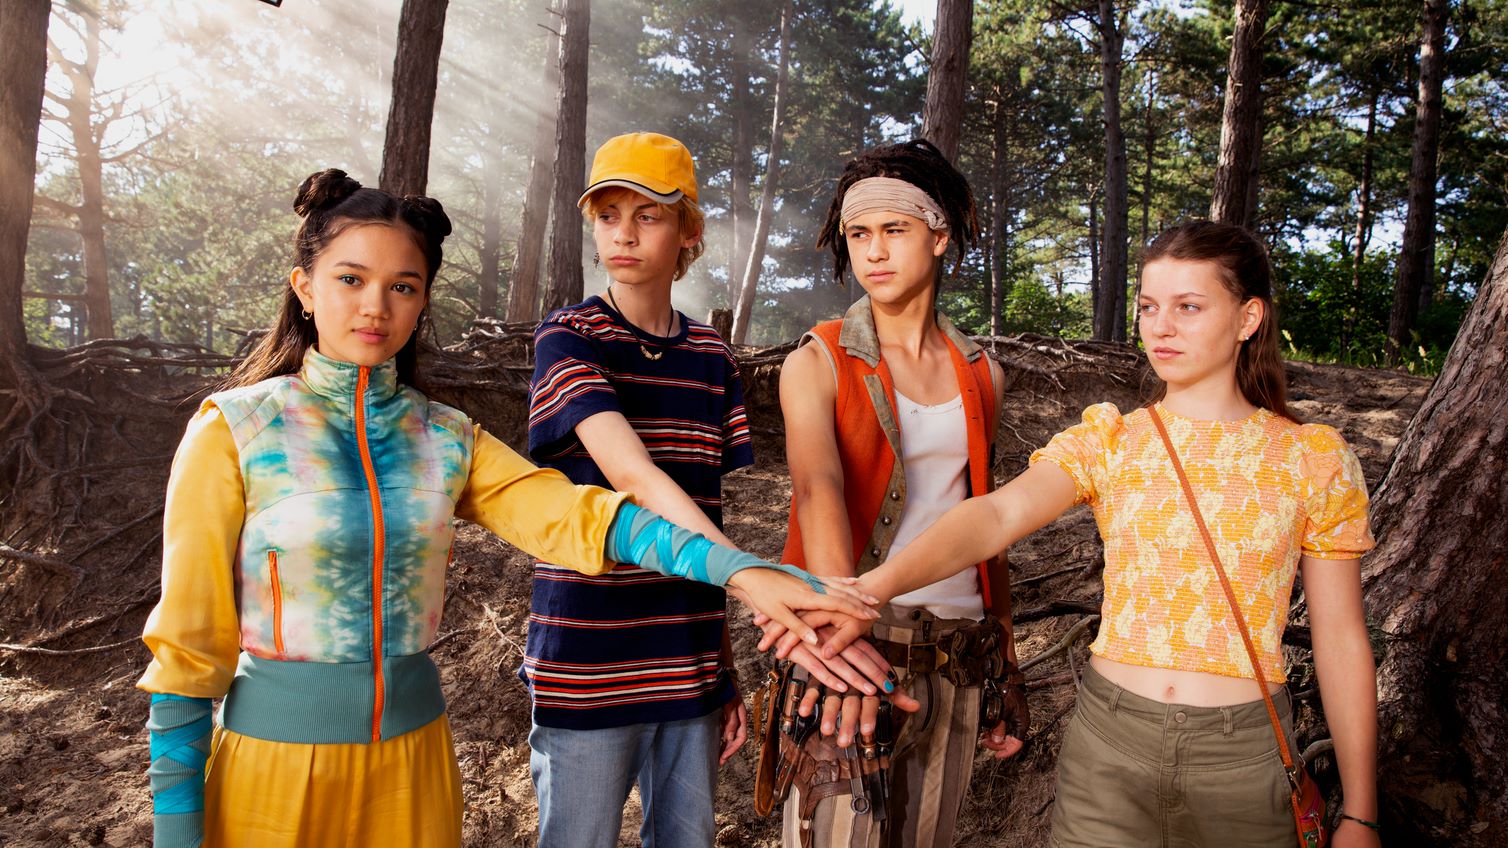 Still from De Piraten van Hiernaast 2. Yuka, Michiel, Billy and Elizabeth are standing in a forest with their hands outstretched, meeting in the middle, like they're going to do a cheer.